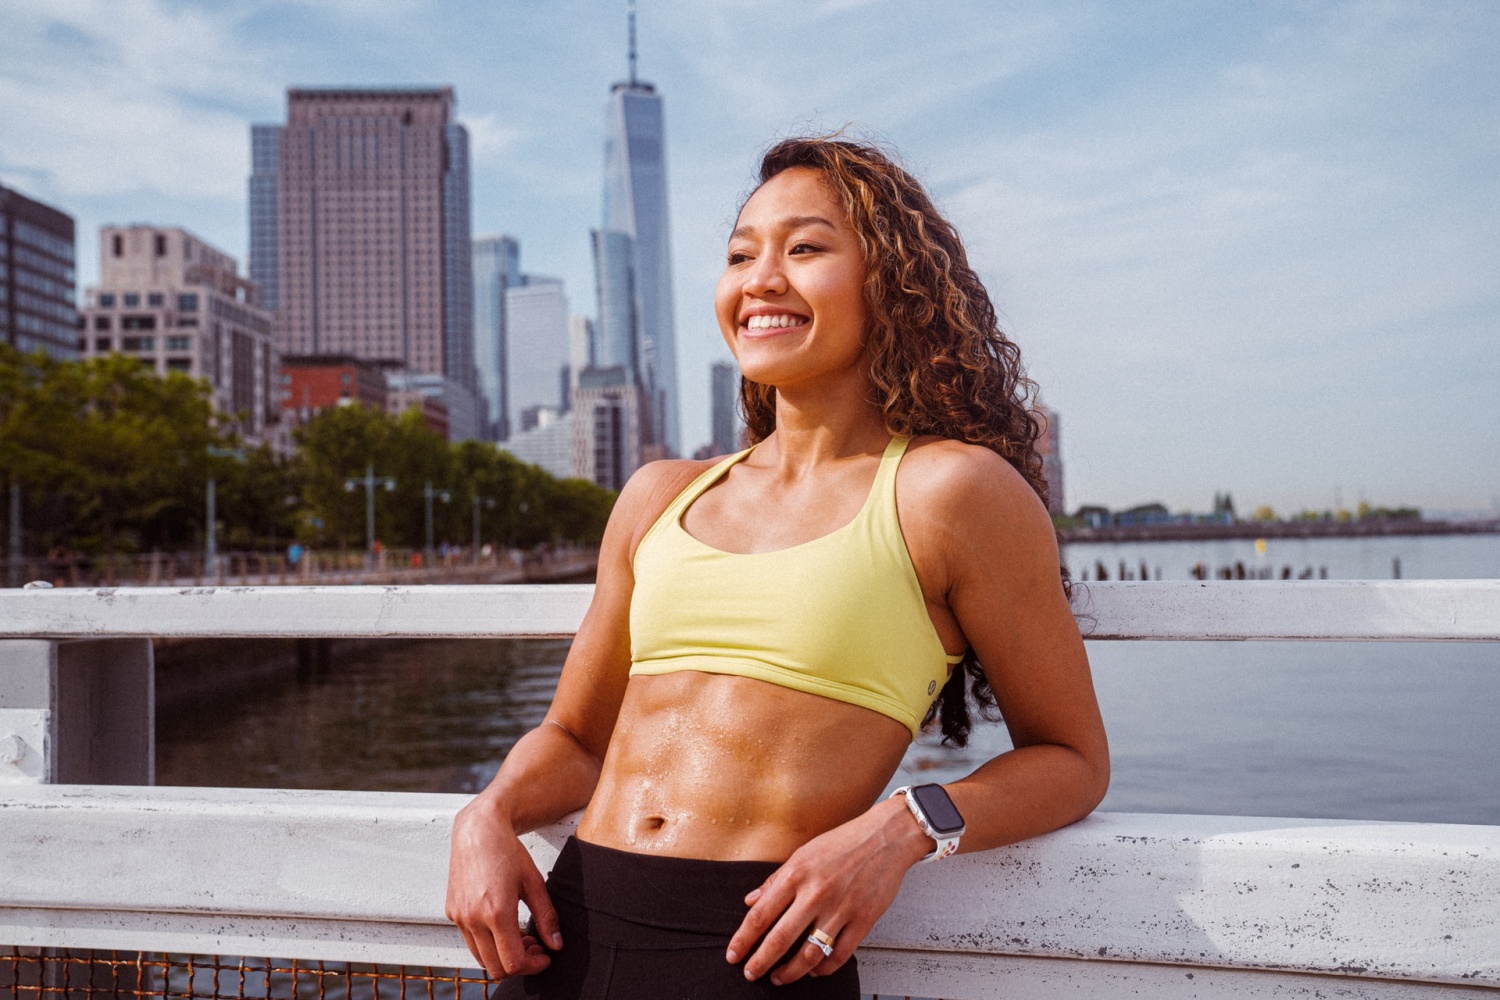 top 5 best workout apps to tone your abs at home